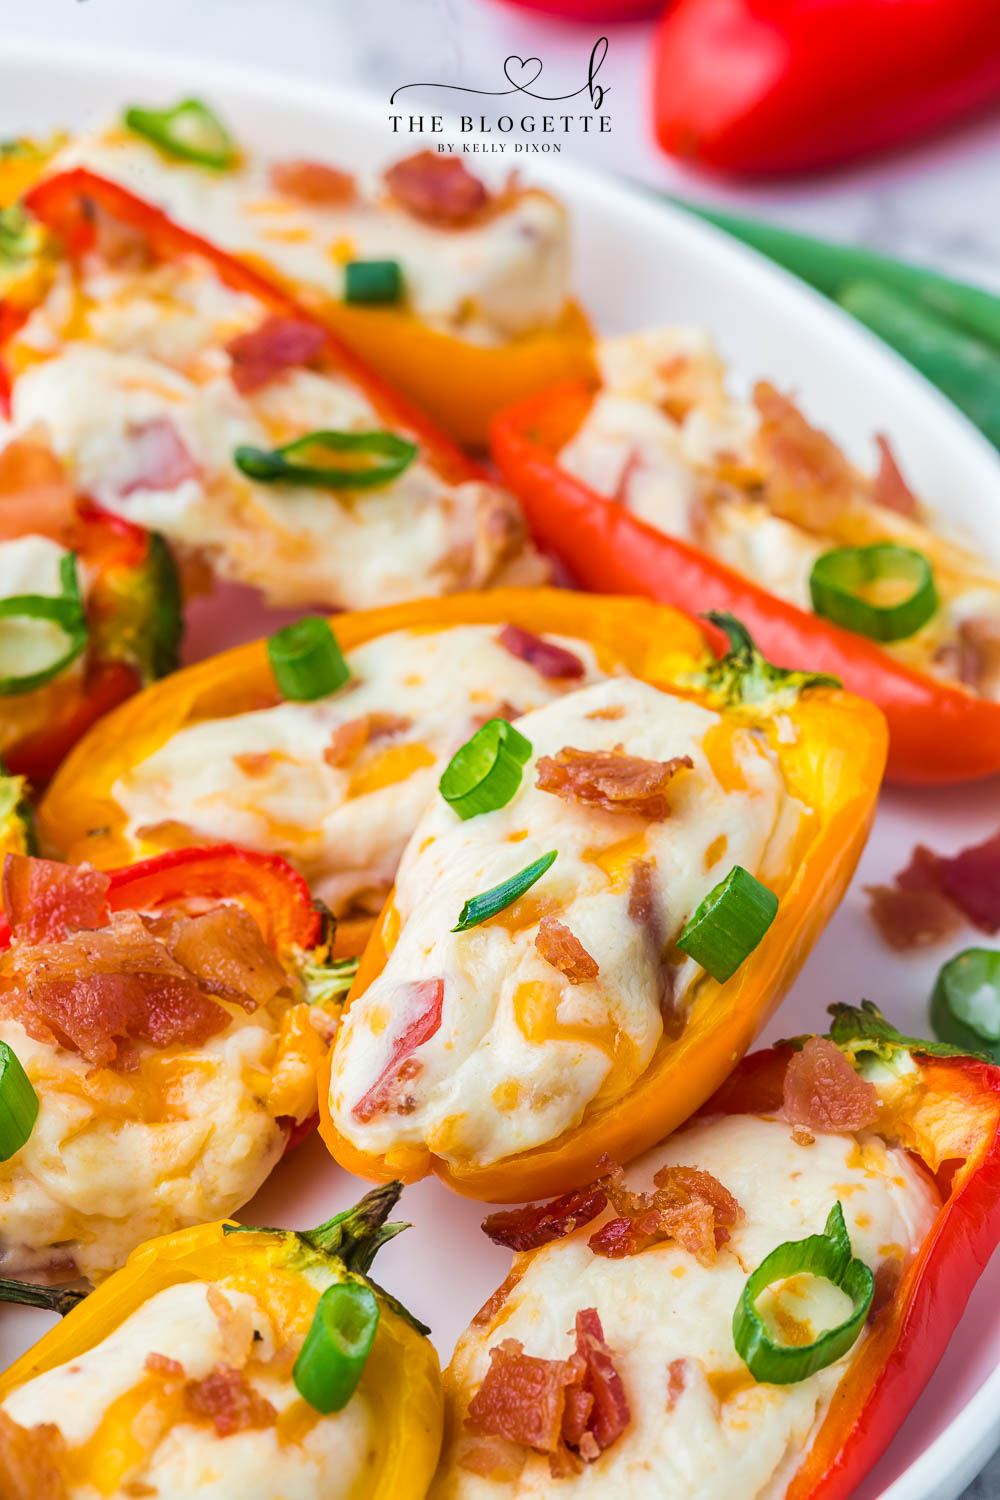 Cheesy Bacon Stuffed Mini Peppers! An easy appetizer idea for any gathering! Sweet mini peppers overflowing with cheese, bacon, and more!